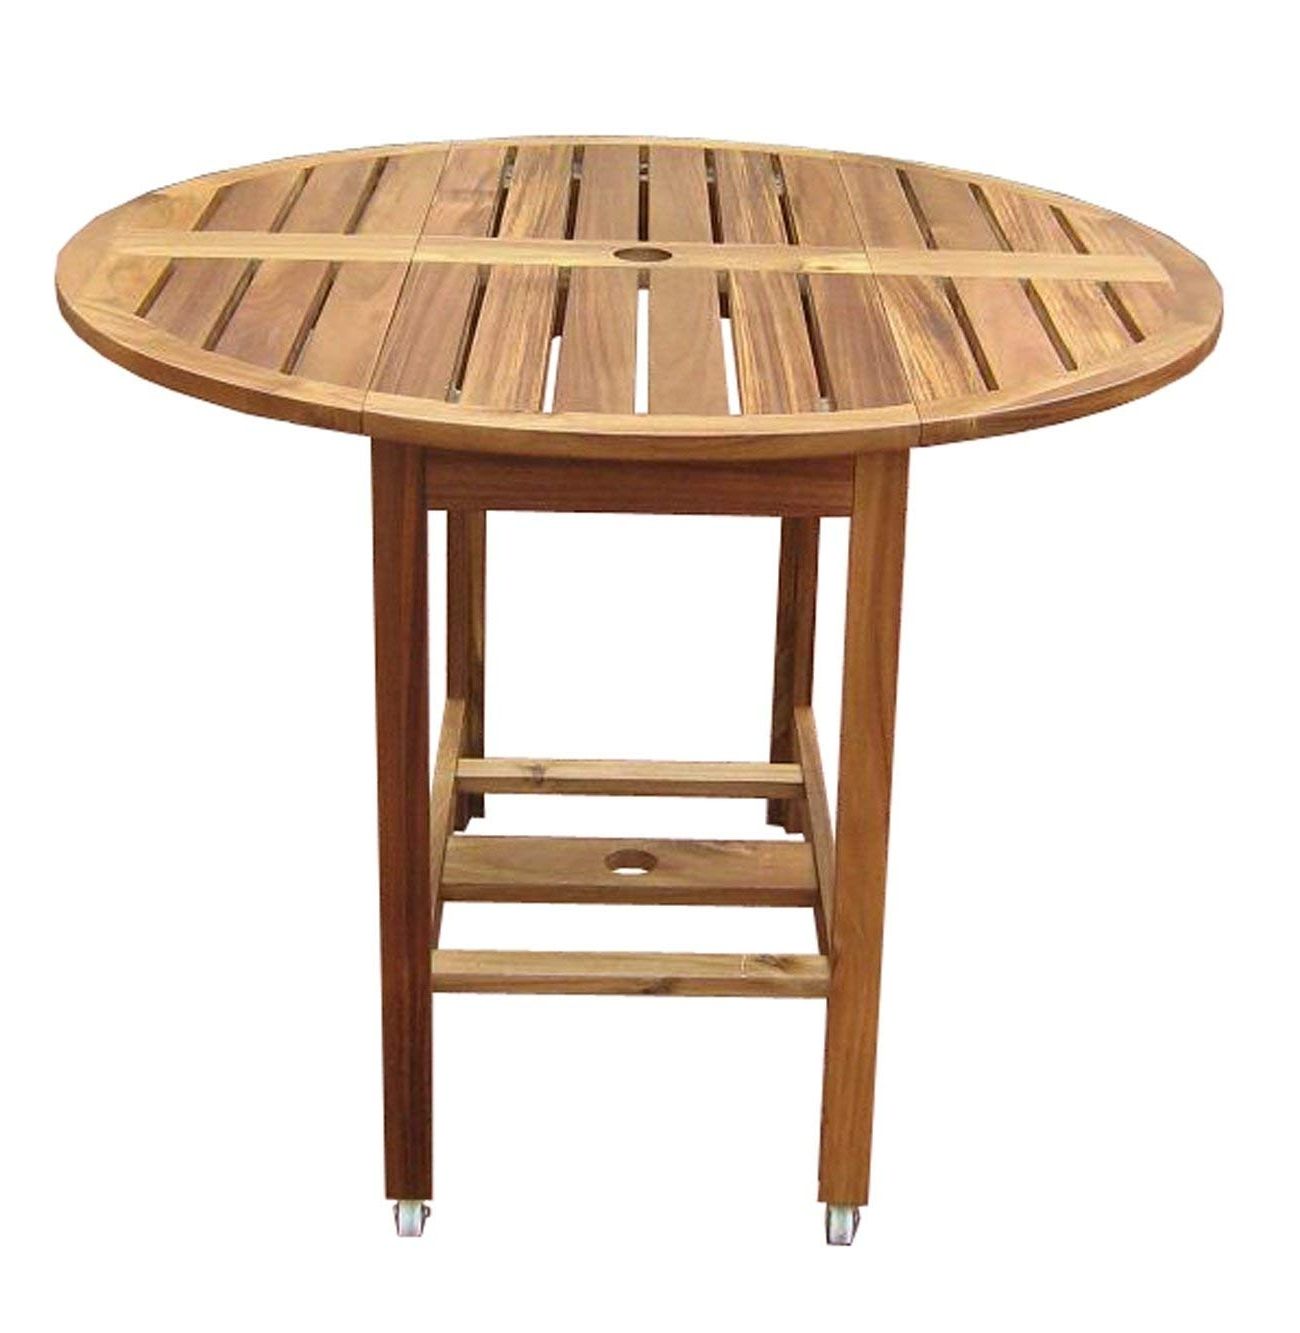 Folding Outdoor Dining Tables Throughout Favorite Amazon : Merry Garden Acacia Folding Dining Table : Folding (View 5 of 25)